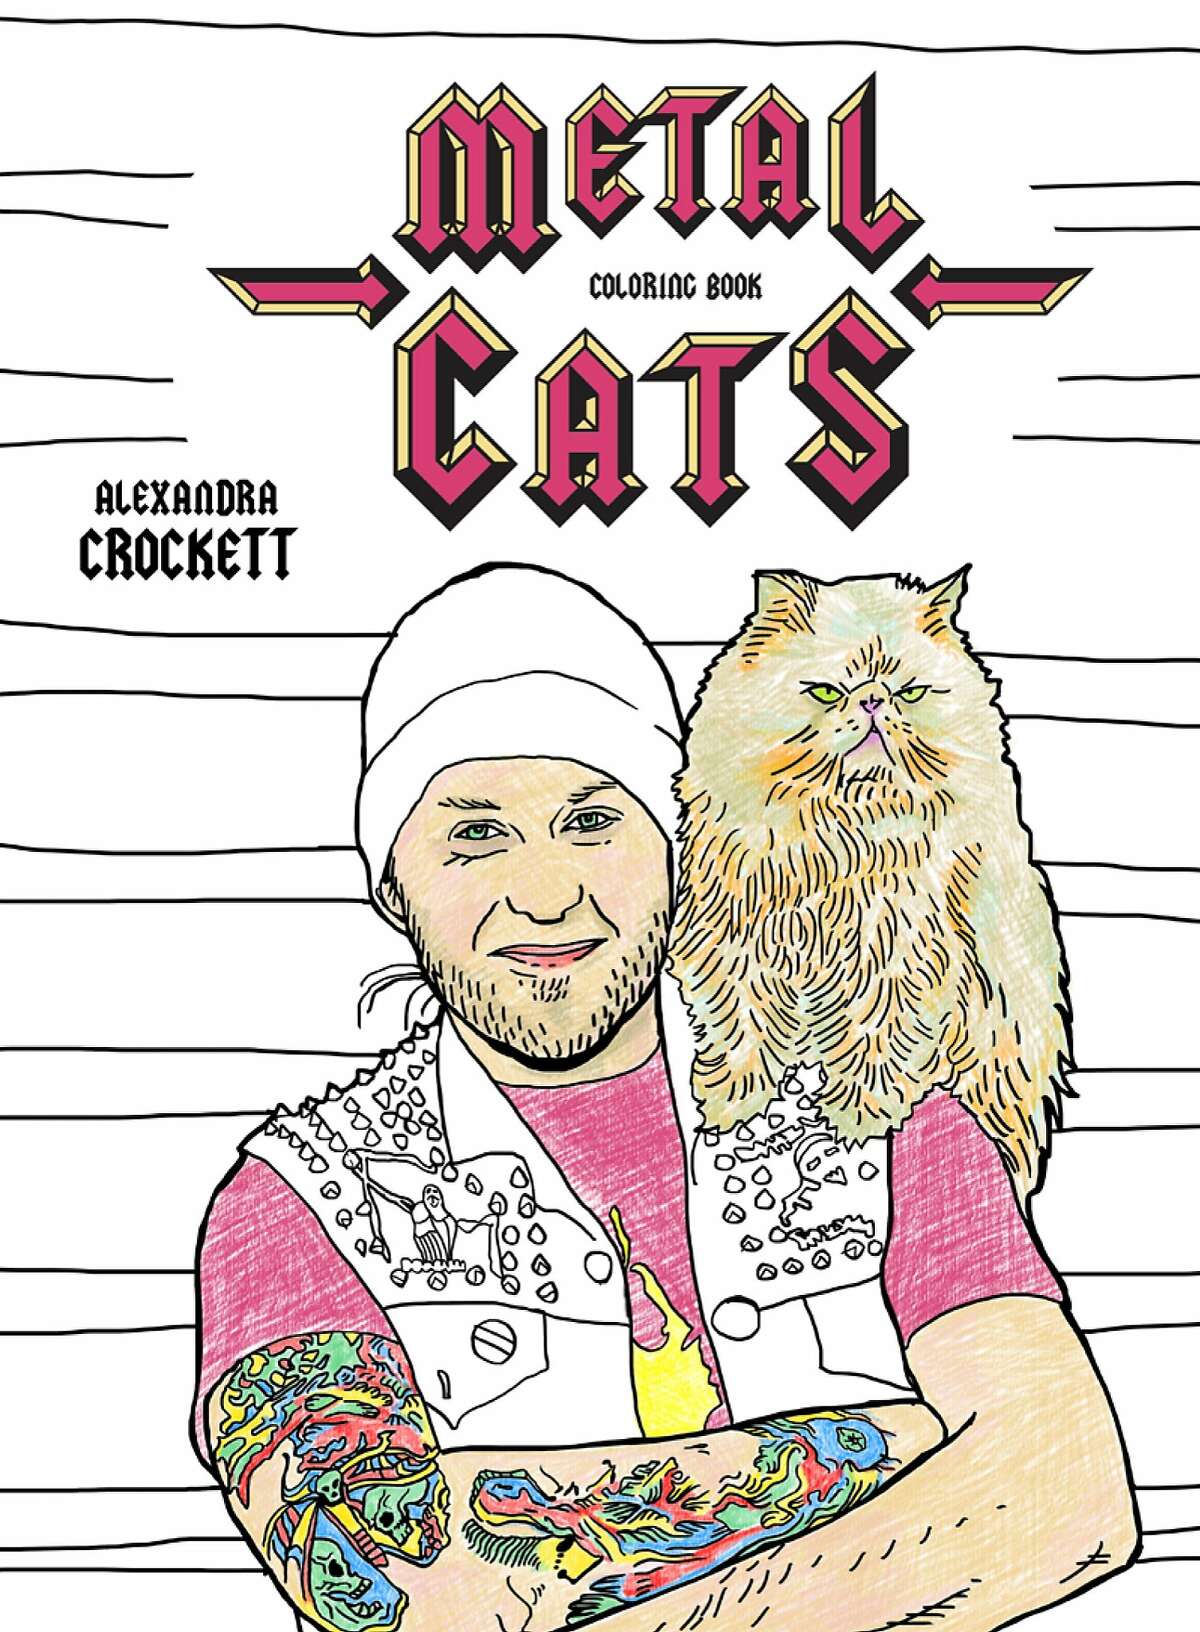 �Metal Cats Coloring Book,� (Powerhouse Books, 2017, $9.99), which capitalizes on the adult coloring book trend, is based a book of the same title, �Metal Cats,� (Powerhouse Books, 2014) � a series of photo portraits by Alexandra Crockett of 30 West Coast heavy metal musicians and their cats. The book was meant to show the softer, human side of heavy metal musicians as they posed with their pets, and to bring attention to no-kill animal shelters. Illustrations for the coloring book are by Chuck Gonzales.